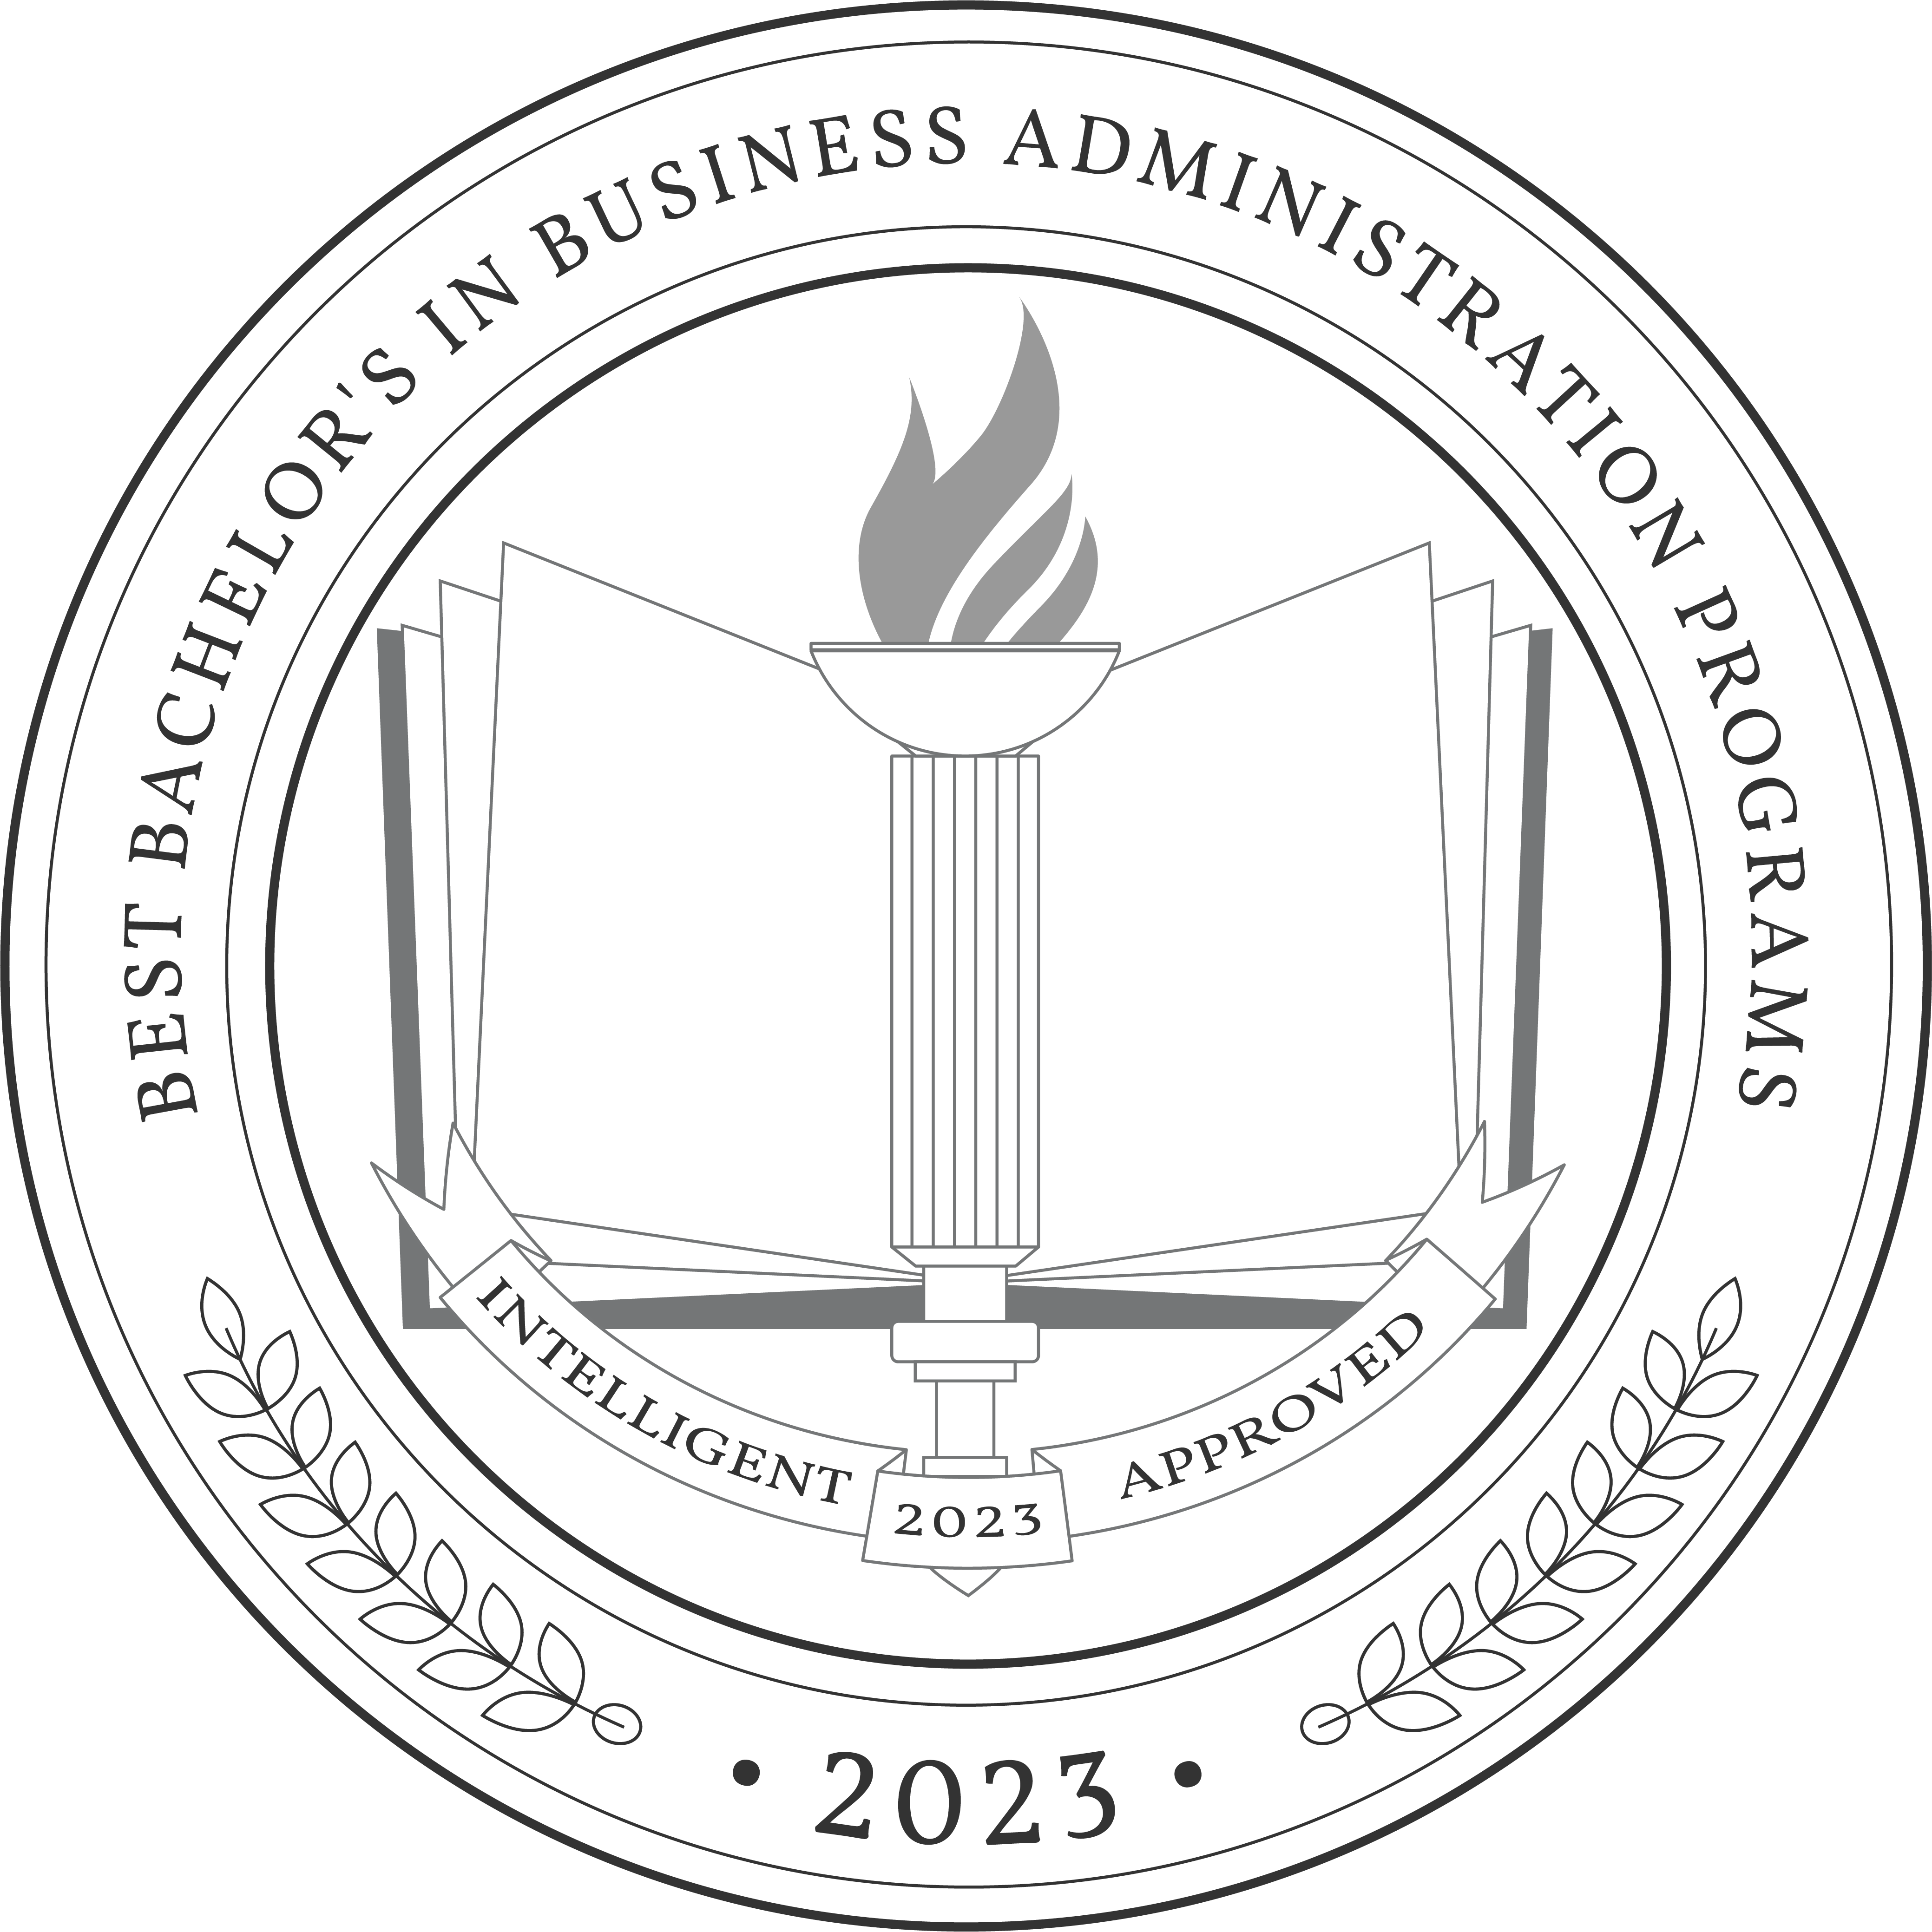 Best Bachelor's in Business Administration Programs 2023